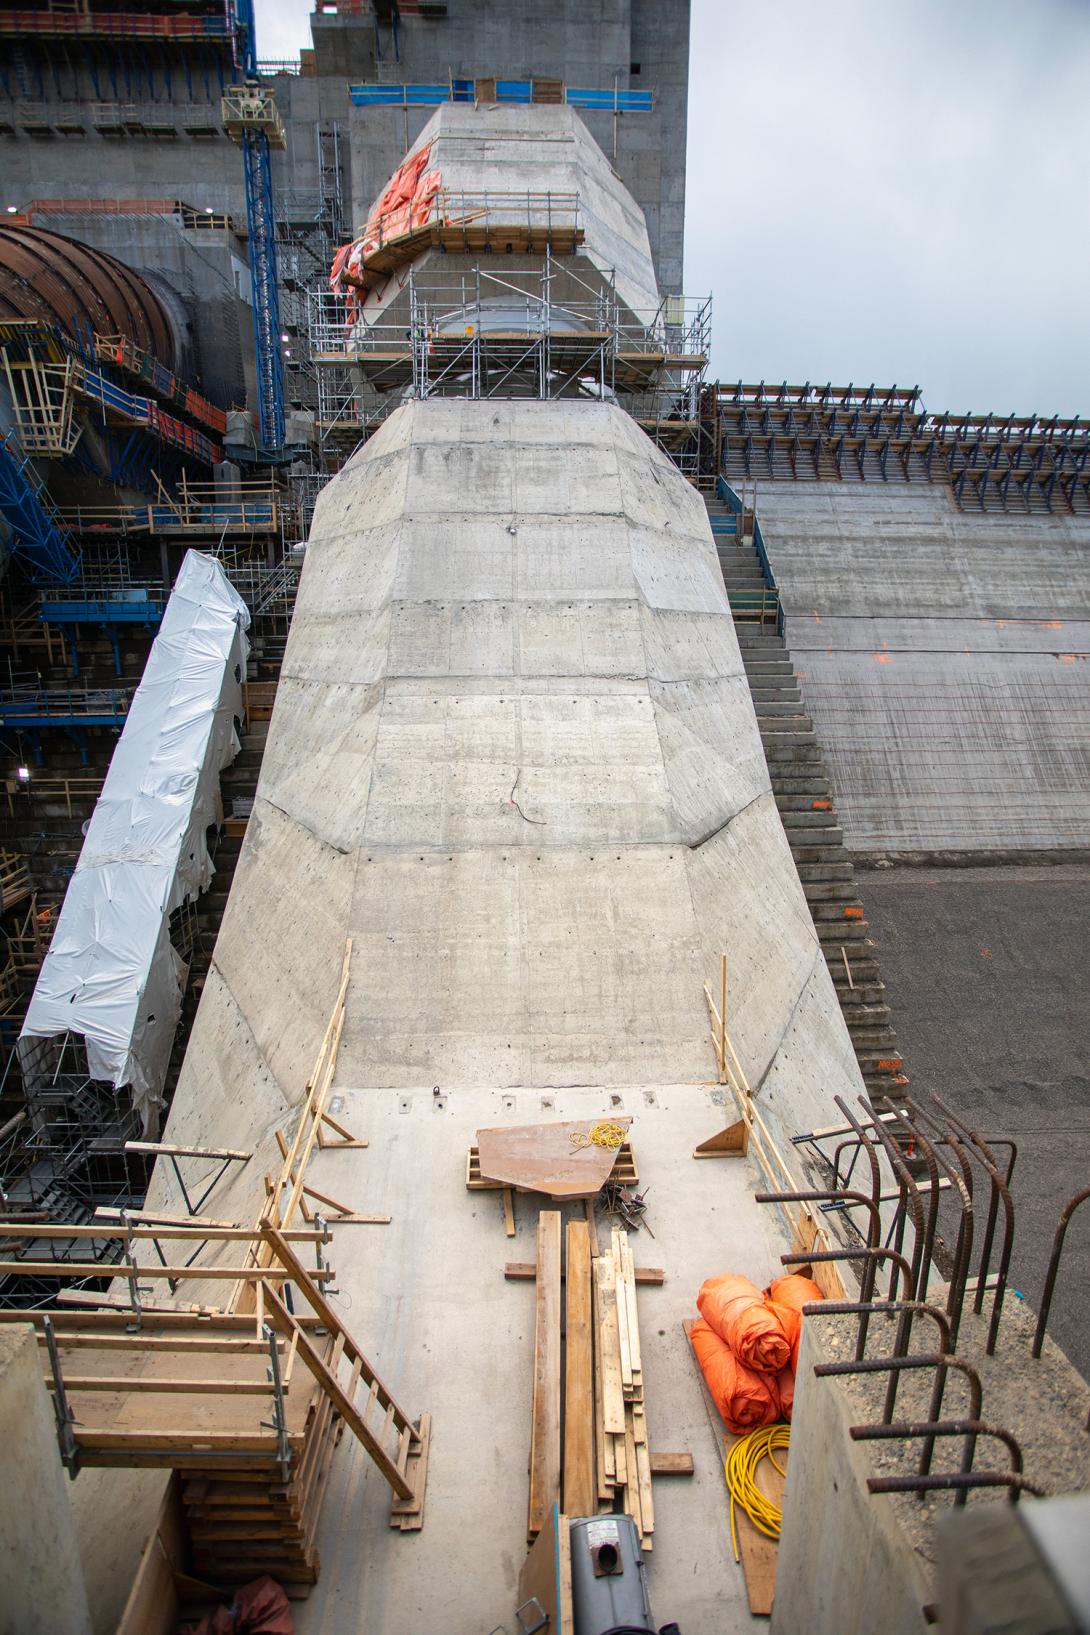 The generating station will have six penstocks to direct water into its six turbine and generator units. The Unit 1 penstock is almost complete with crews currently working on the concrete casing. | May 2021 